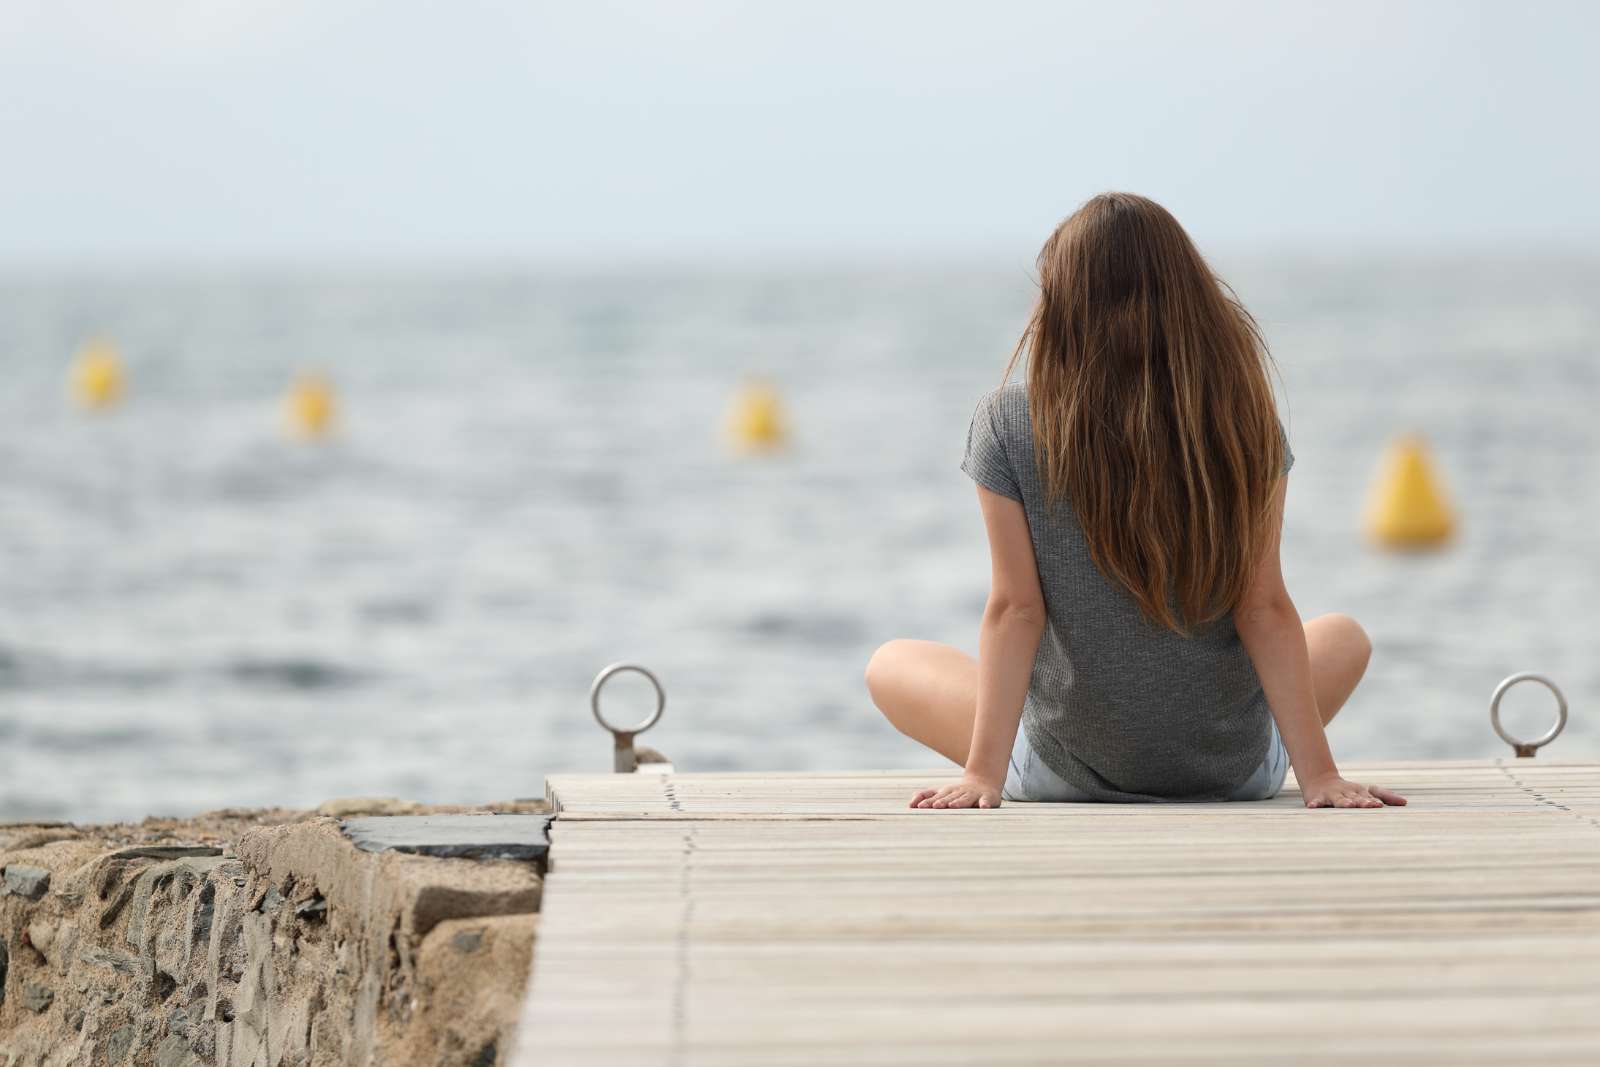 Teen girl with long brown hair sits on a pier looking out at the ocean. She's facing away from the camera, wearing a gray tee shirt and denim shorts.